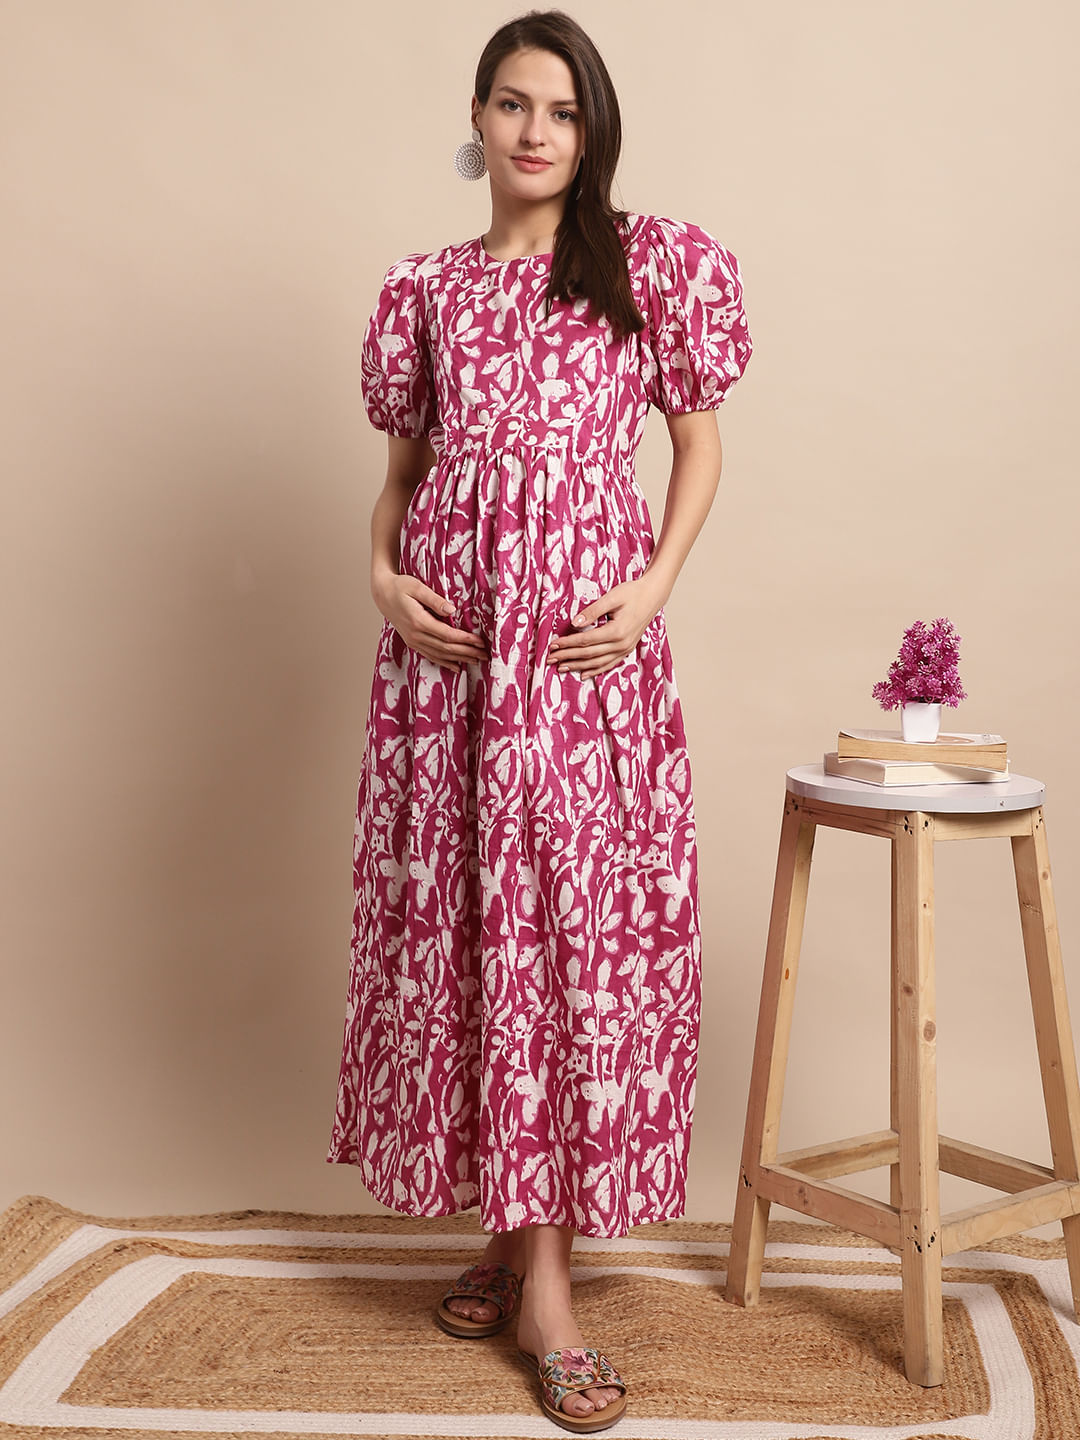 Pink and White Floral Printed Maternity Dress